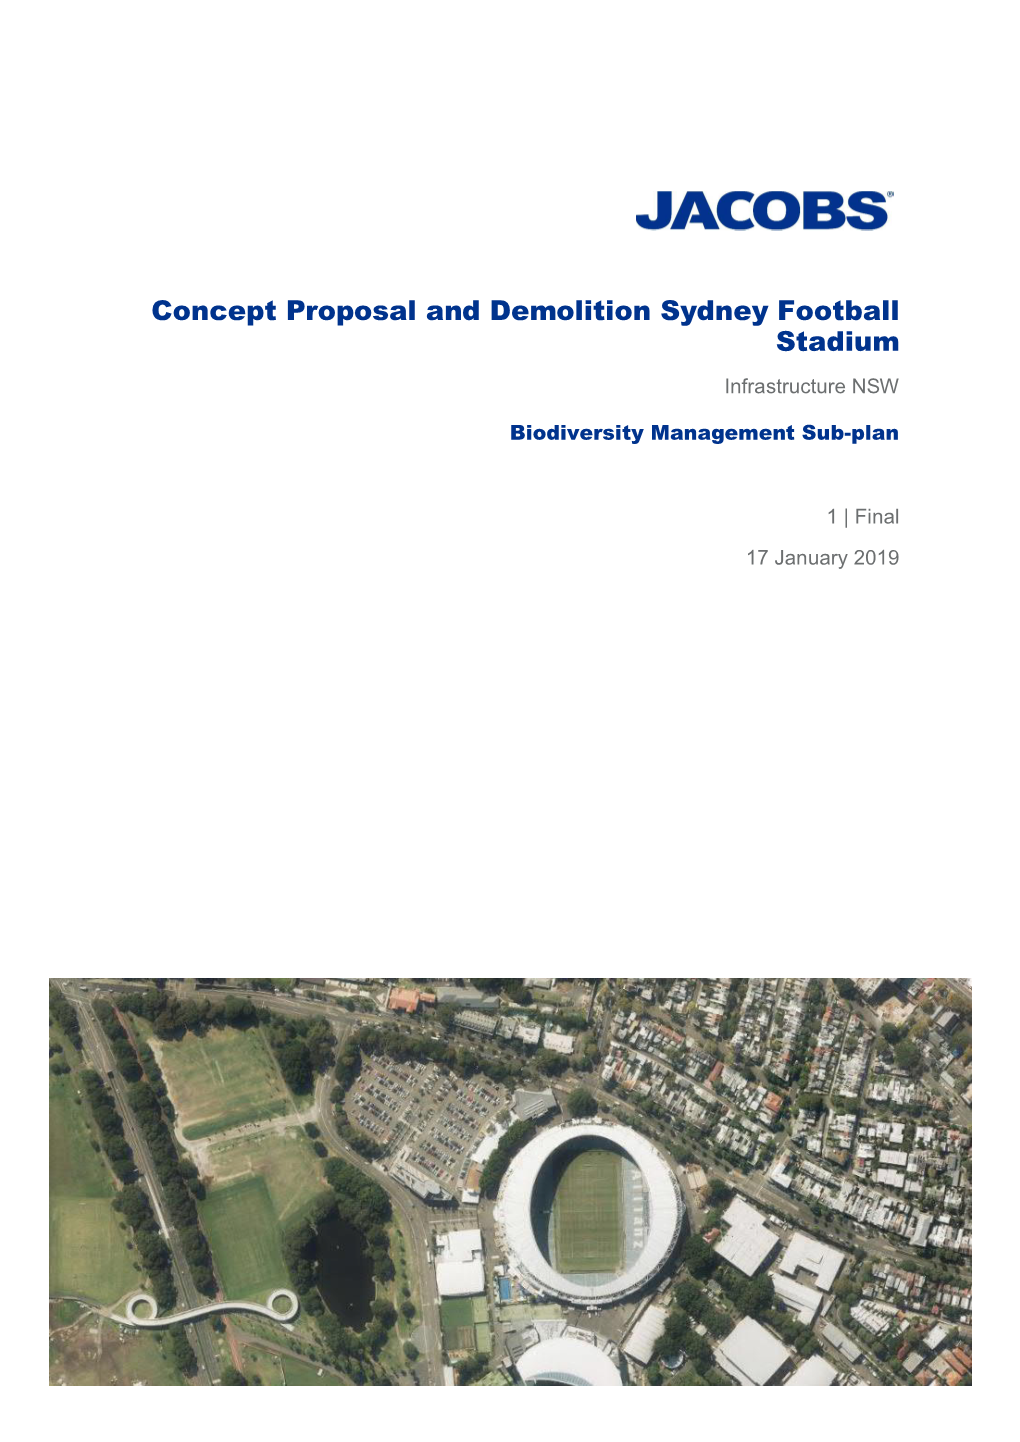 Concept Proposal and Demolition Sydney Football Stadium Infrastructure NSW